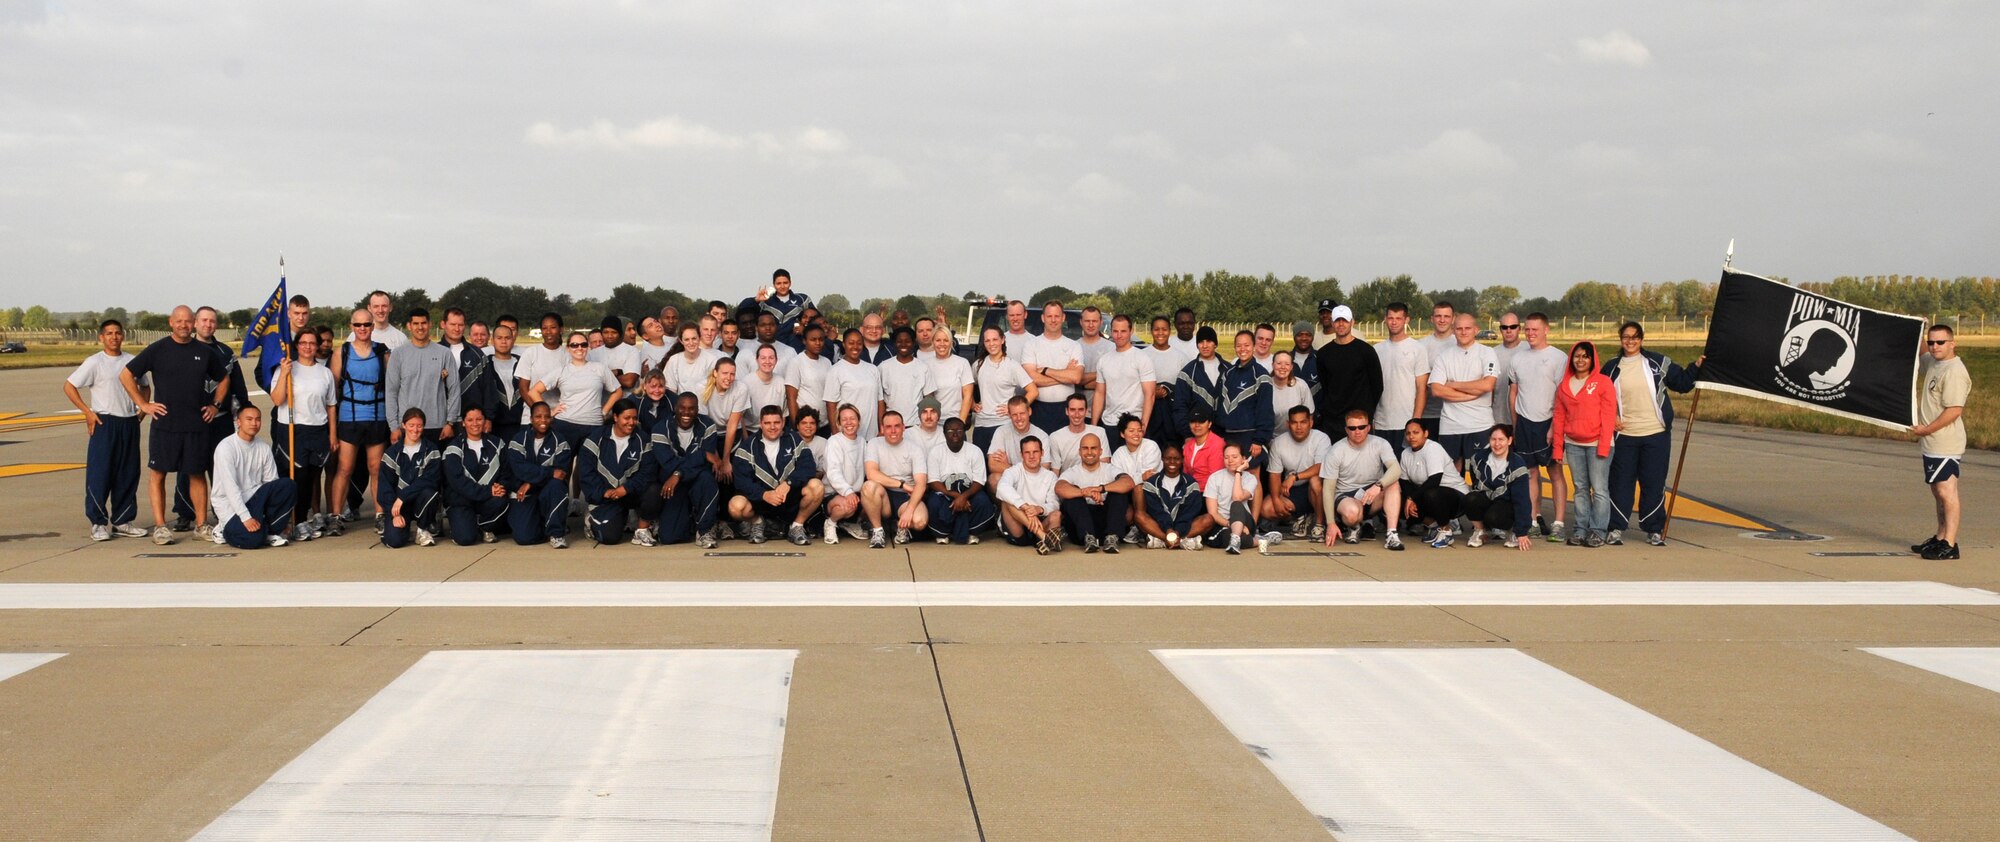 RAF MILDENHALL, England – A group photo of all the people who participated in the Prisoner of War, Missing in Action 5k remembrance run Sept. 14, 2009. (U.S. Air Force photo/ Staff Sergeant Jerry Fleshman)